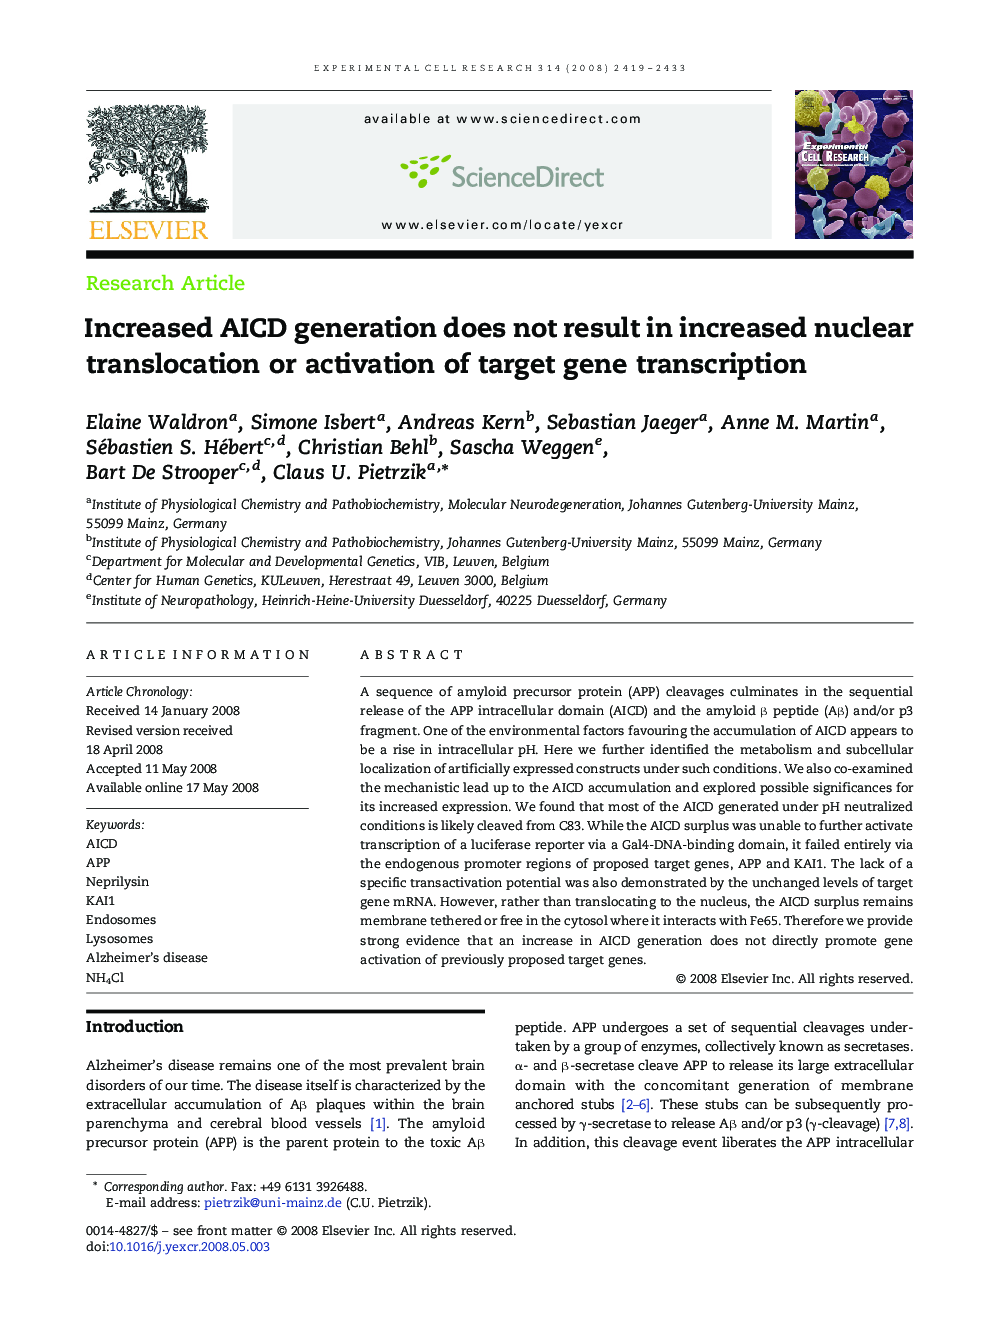 Increased AICD generation does not result in increased nuclear translocation or activation of target gene transcription